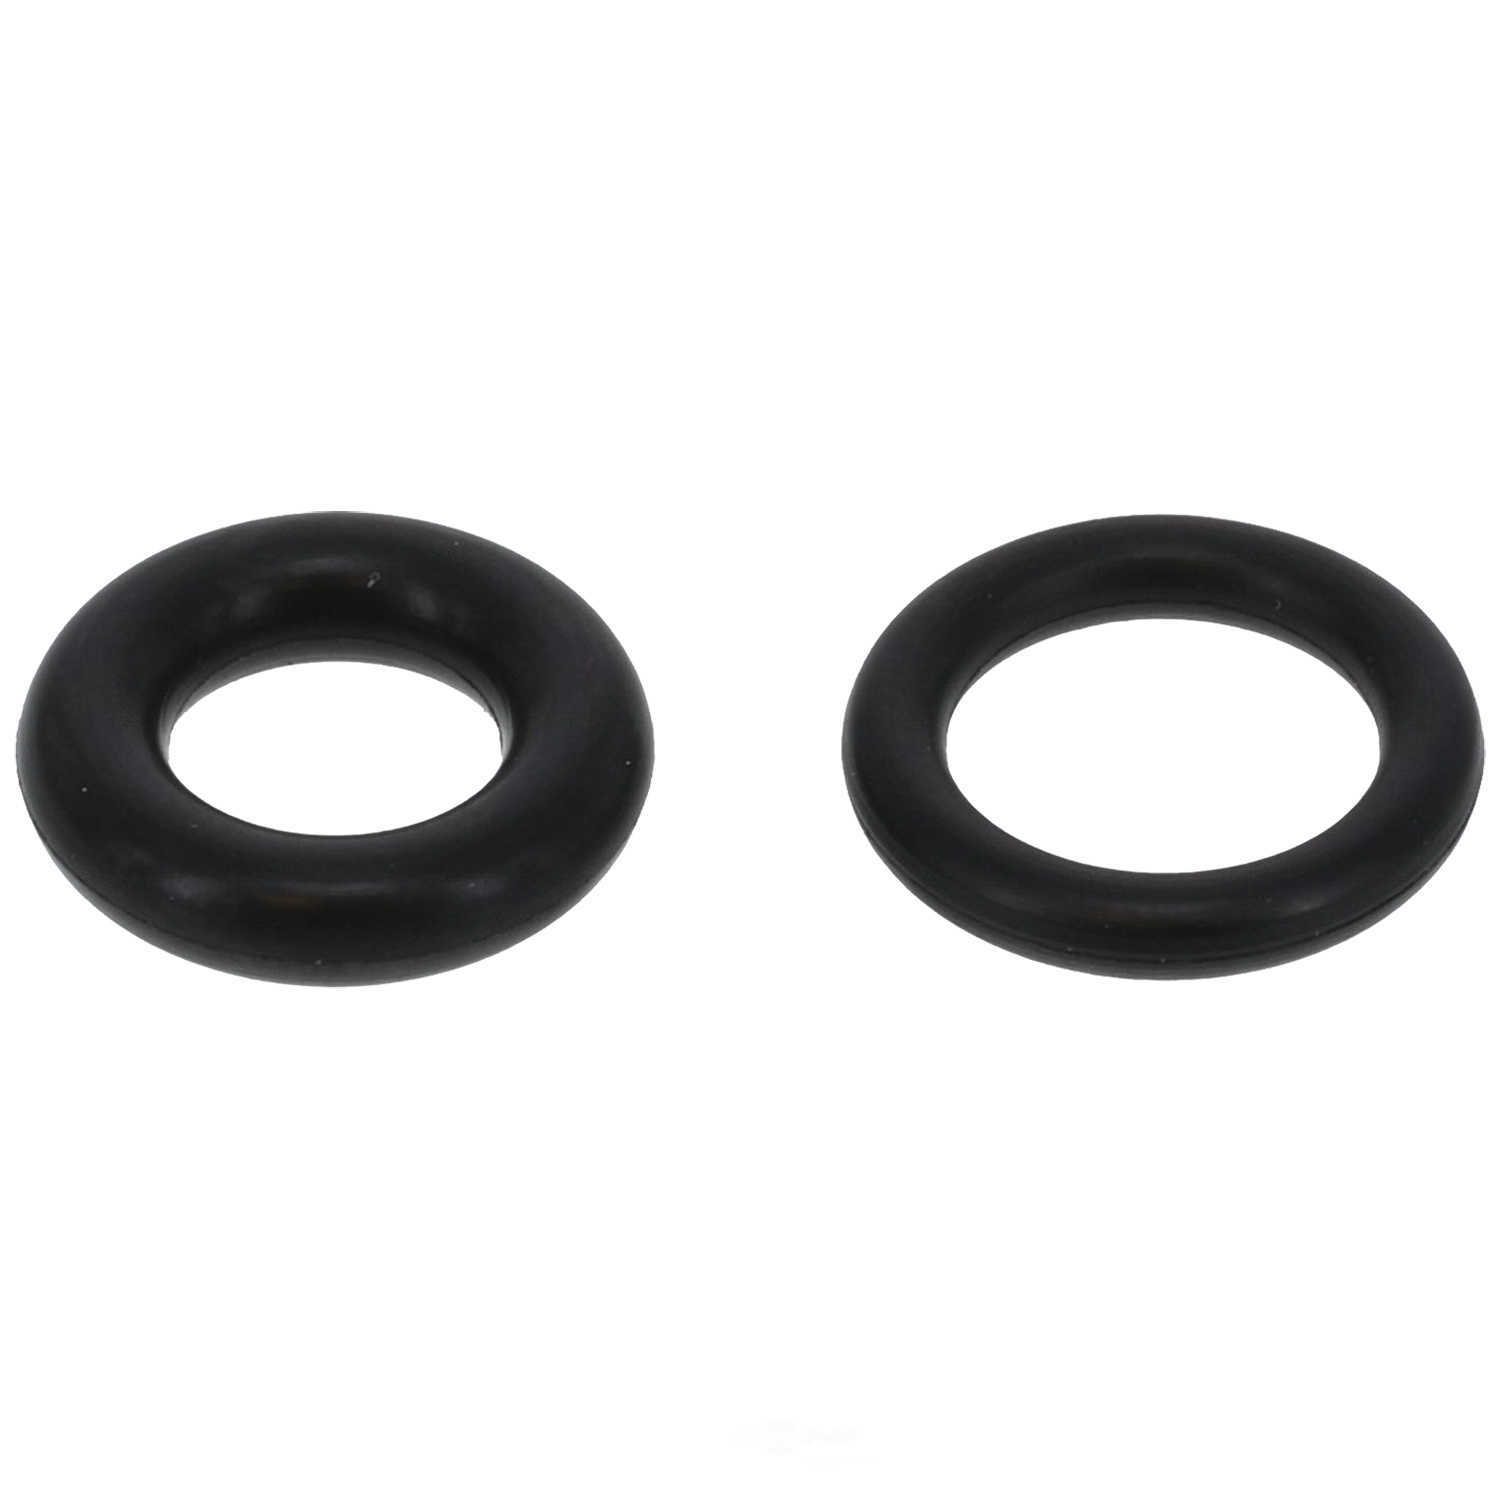 GB REMANUFACTURING INC. - Fuel Injector Seal Kit - GBR 8-044